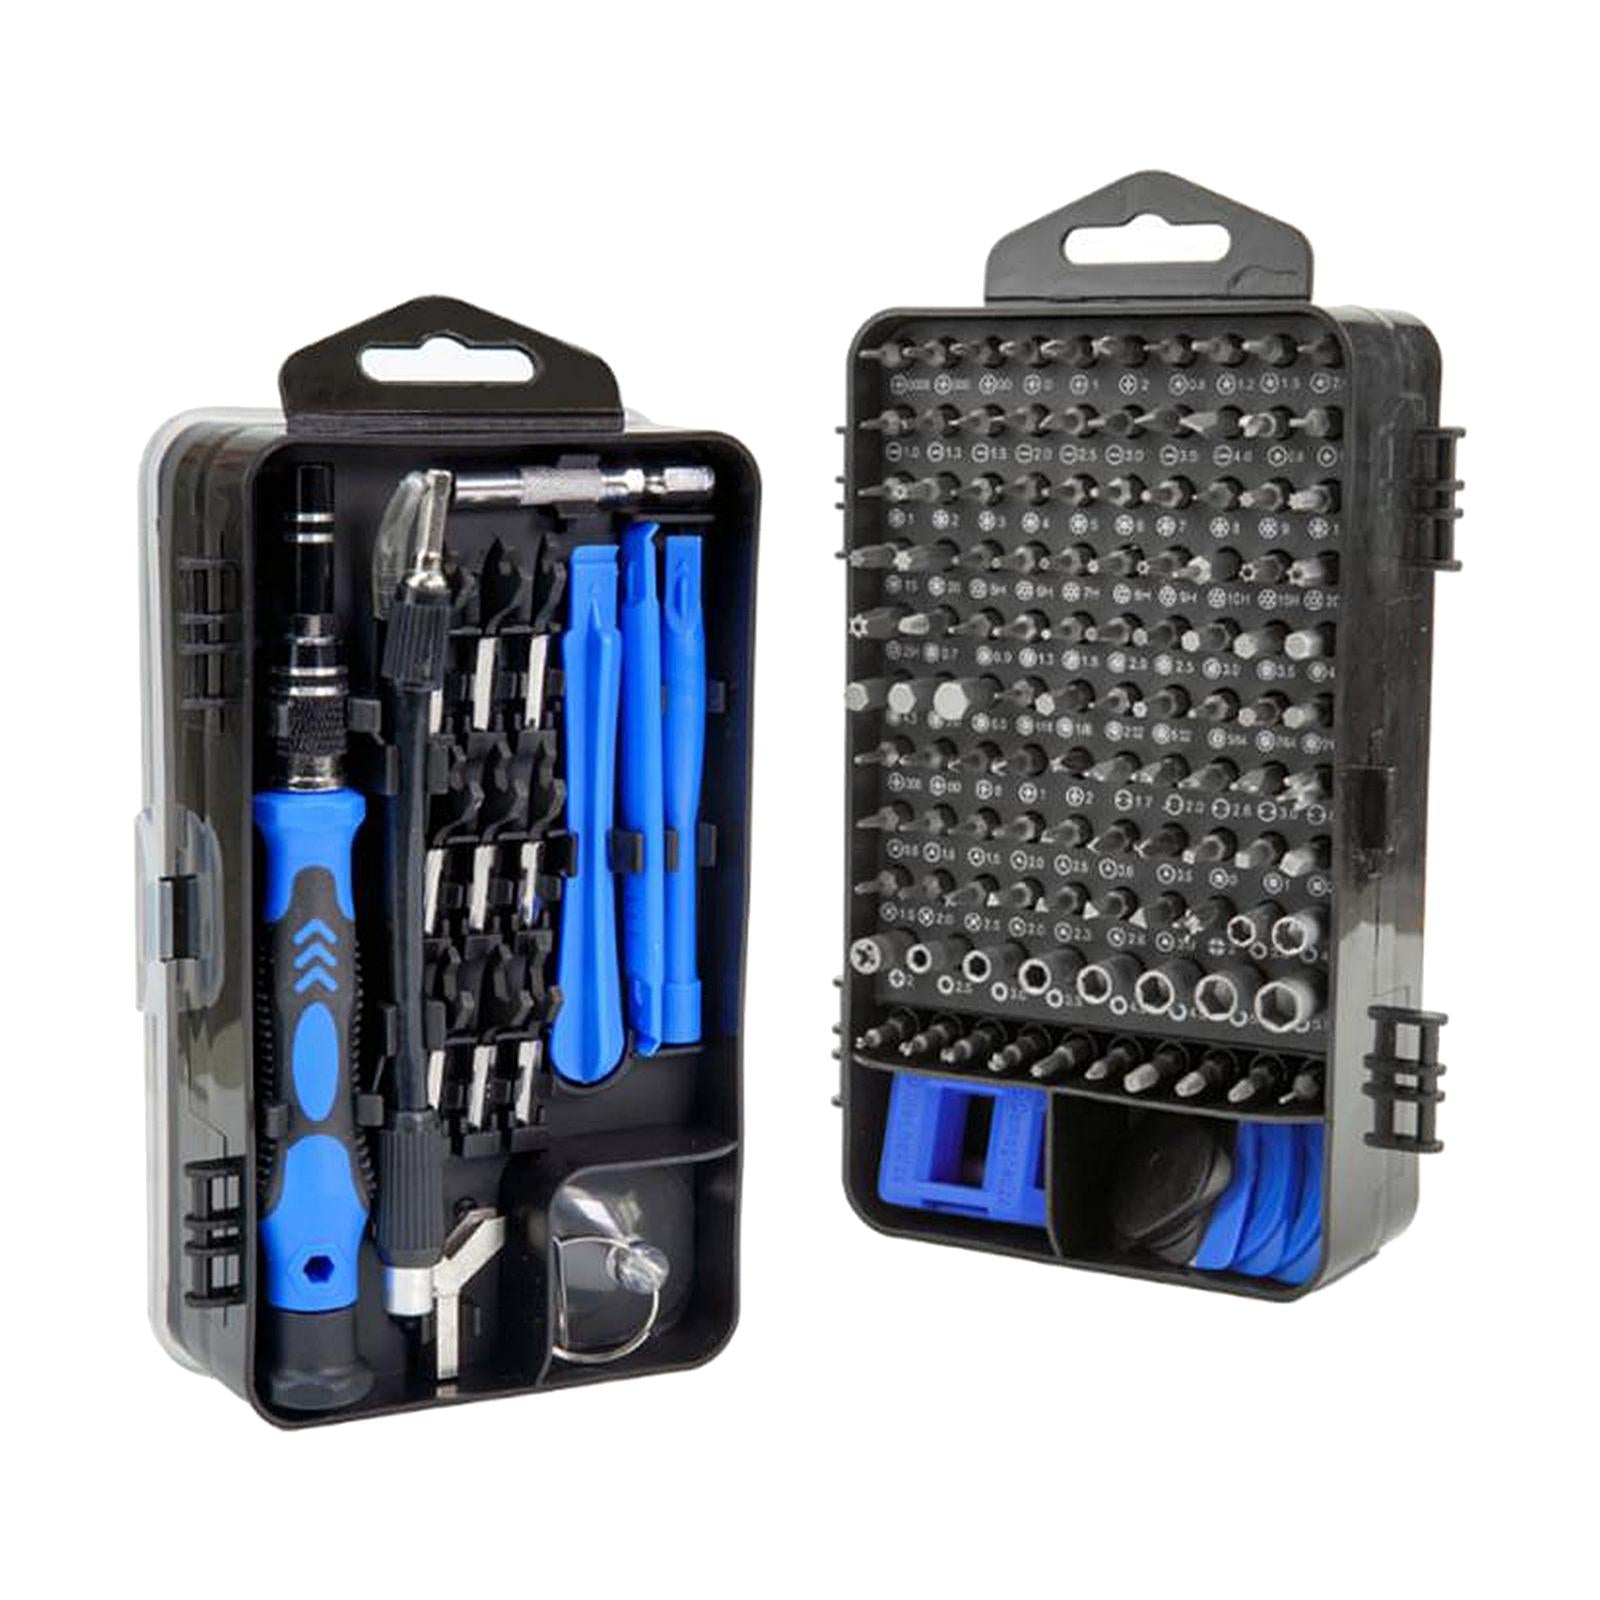 138 in 1 Screwdriver Kit Repair Tool Kits with Case for Cellphone DIY Laptop Blue